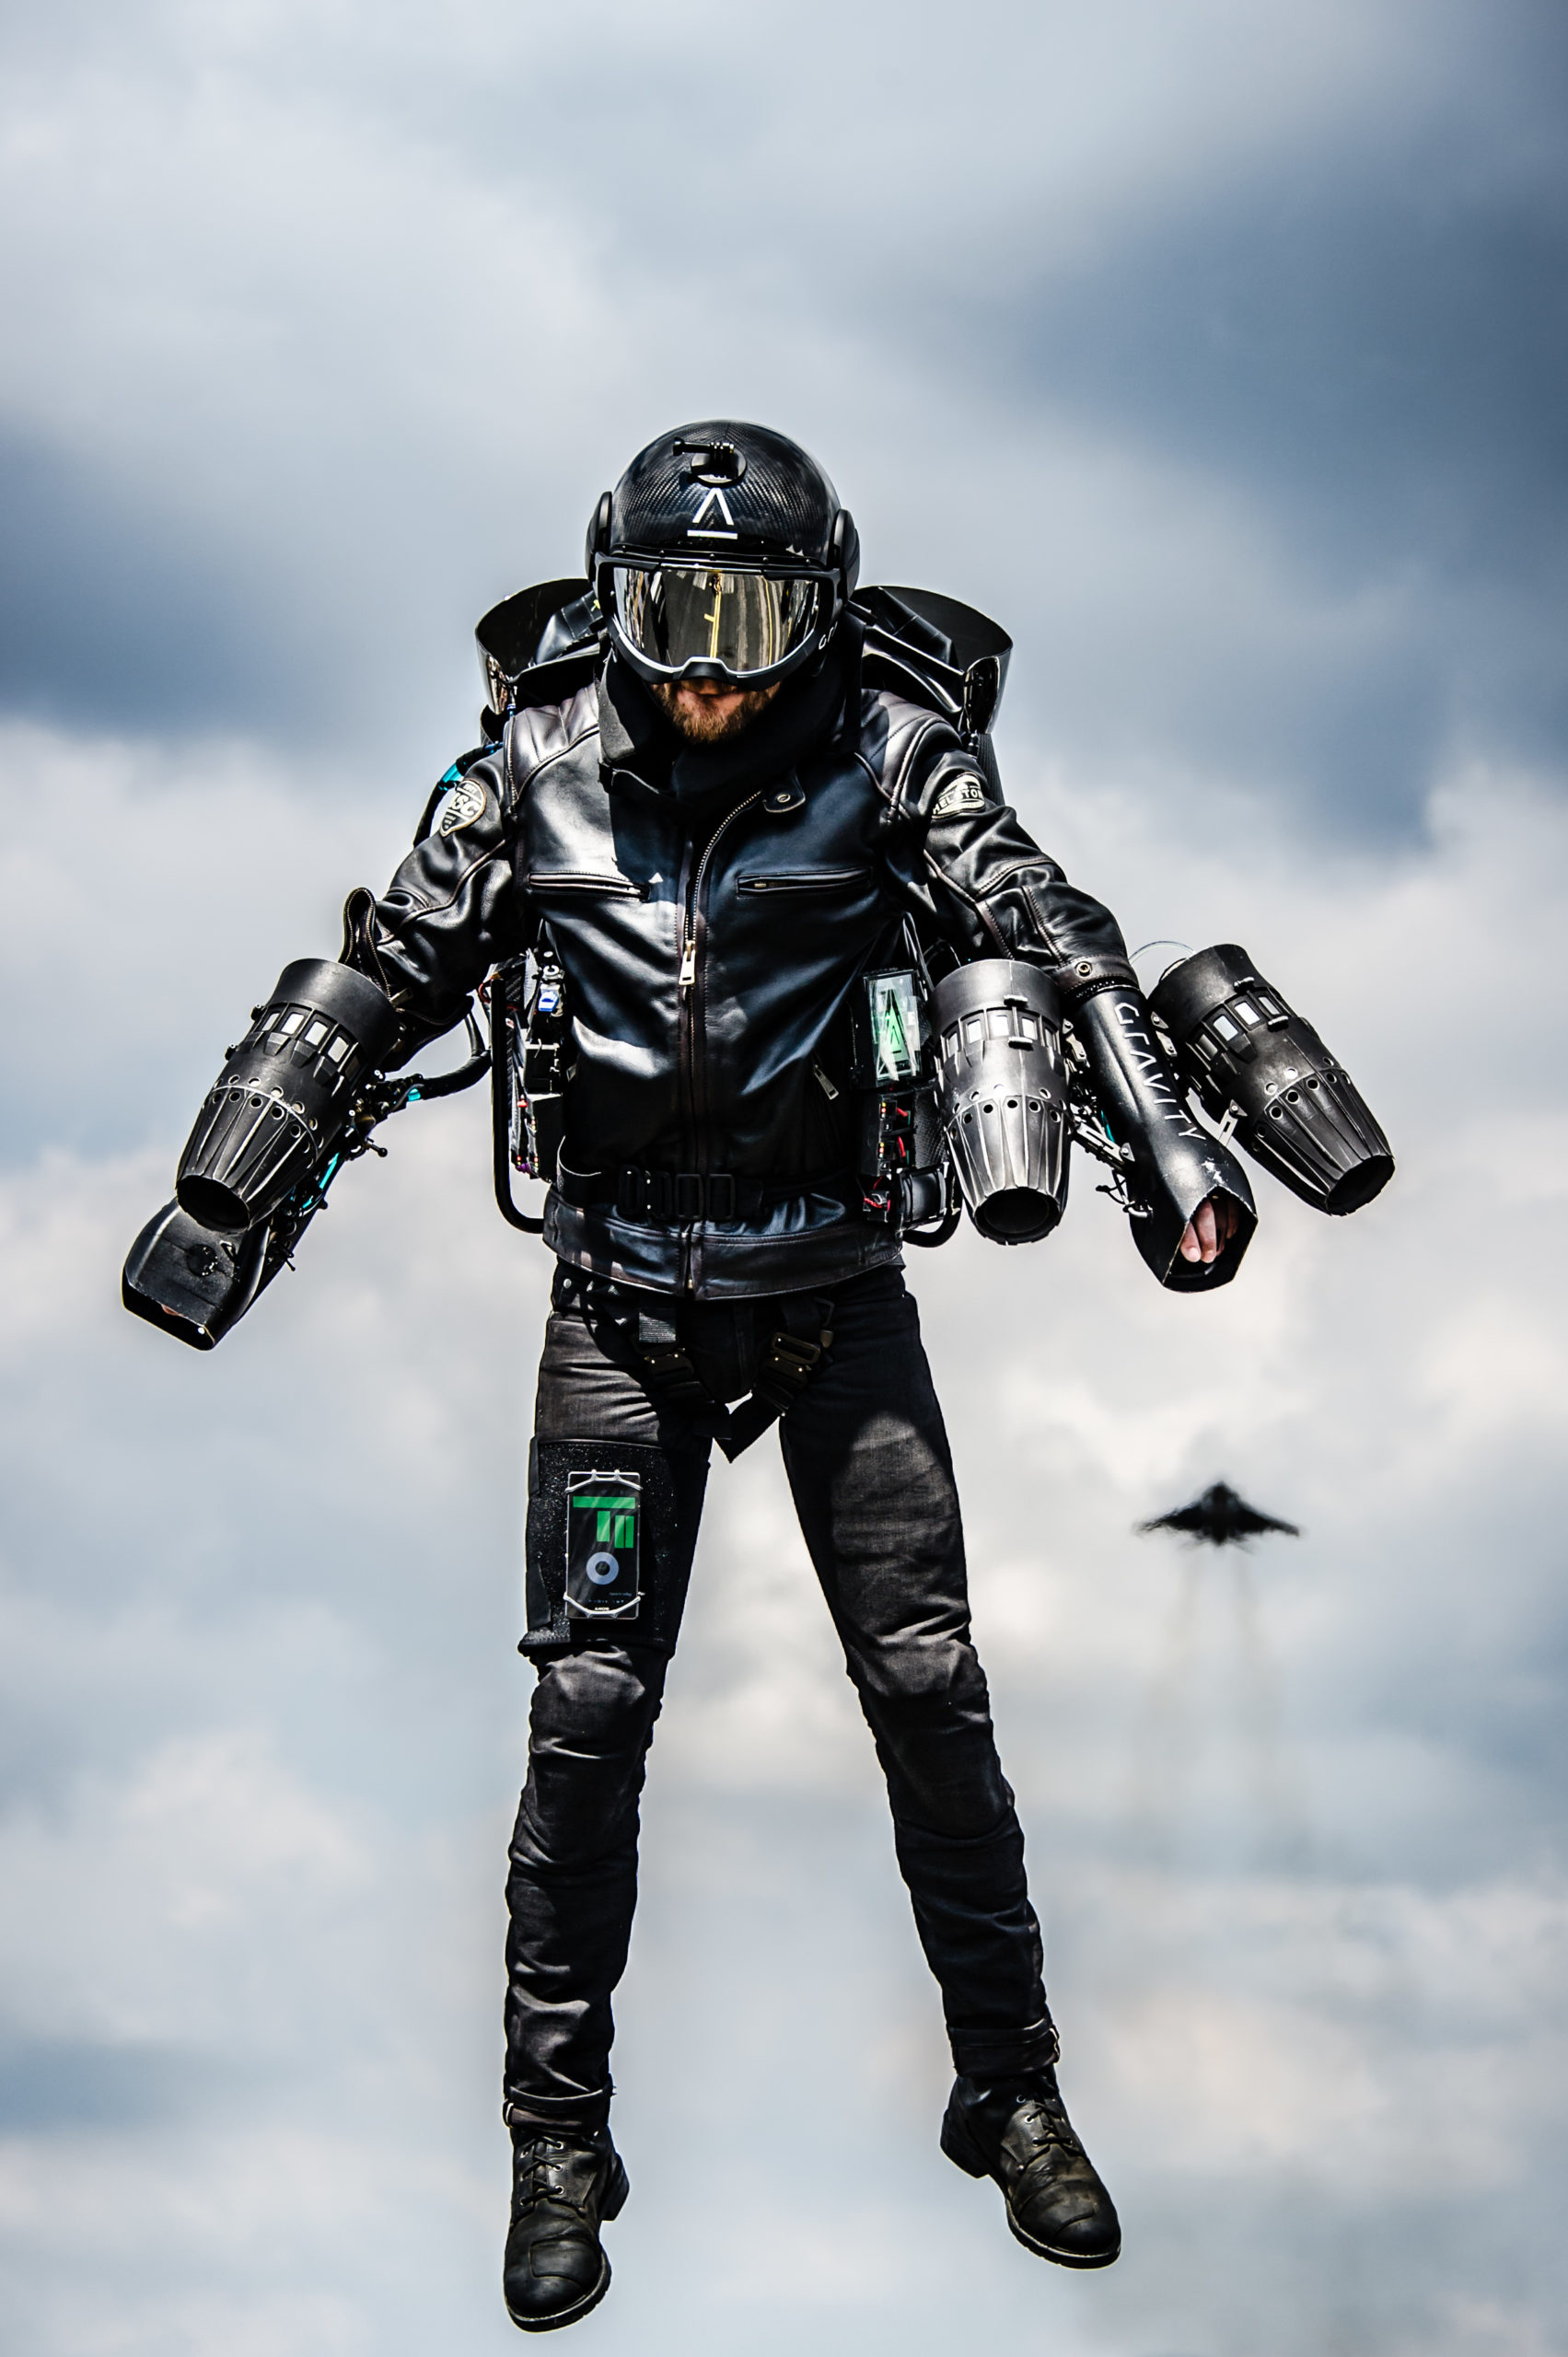 Iron Man like Jet Suit available for humans to buy - The Washington Post